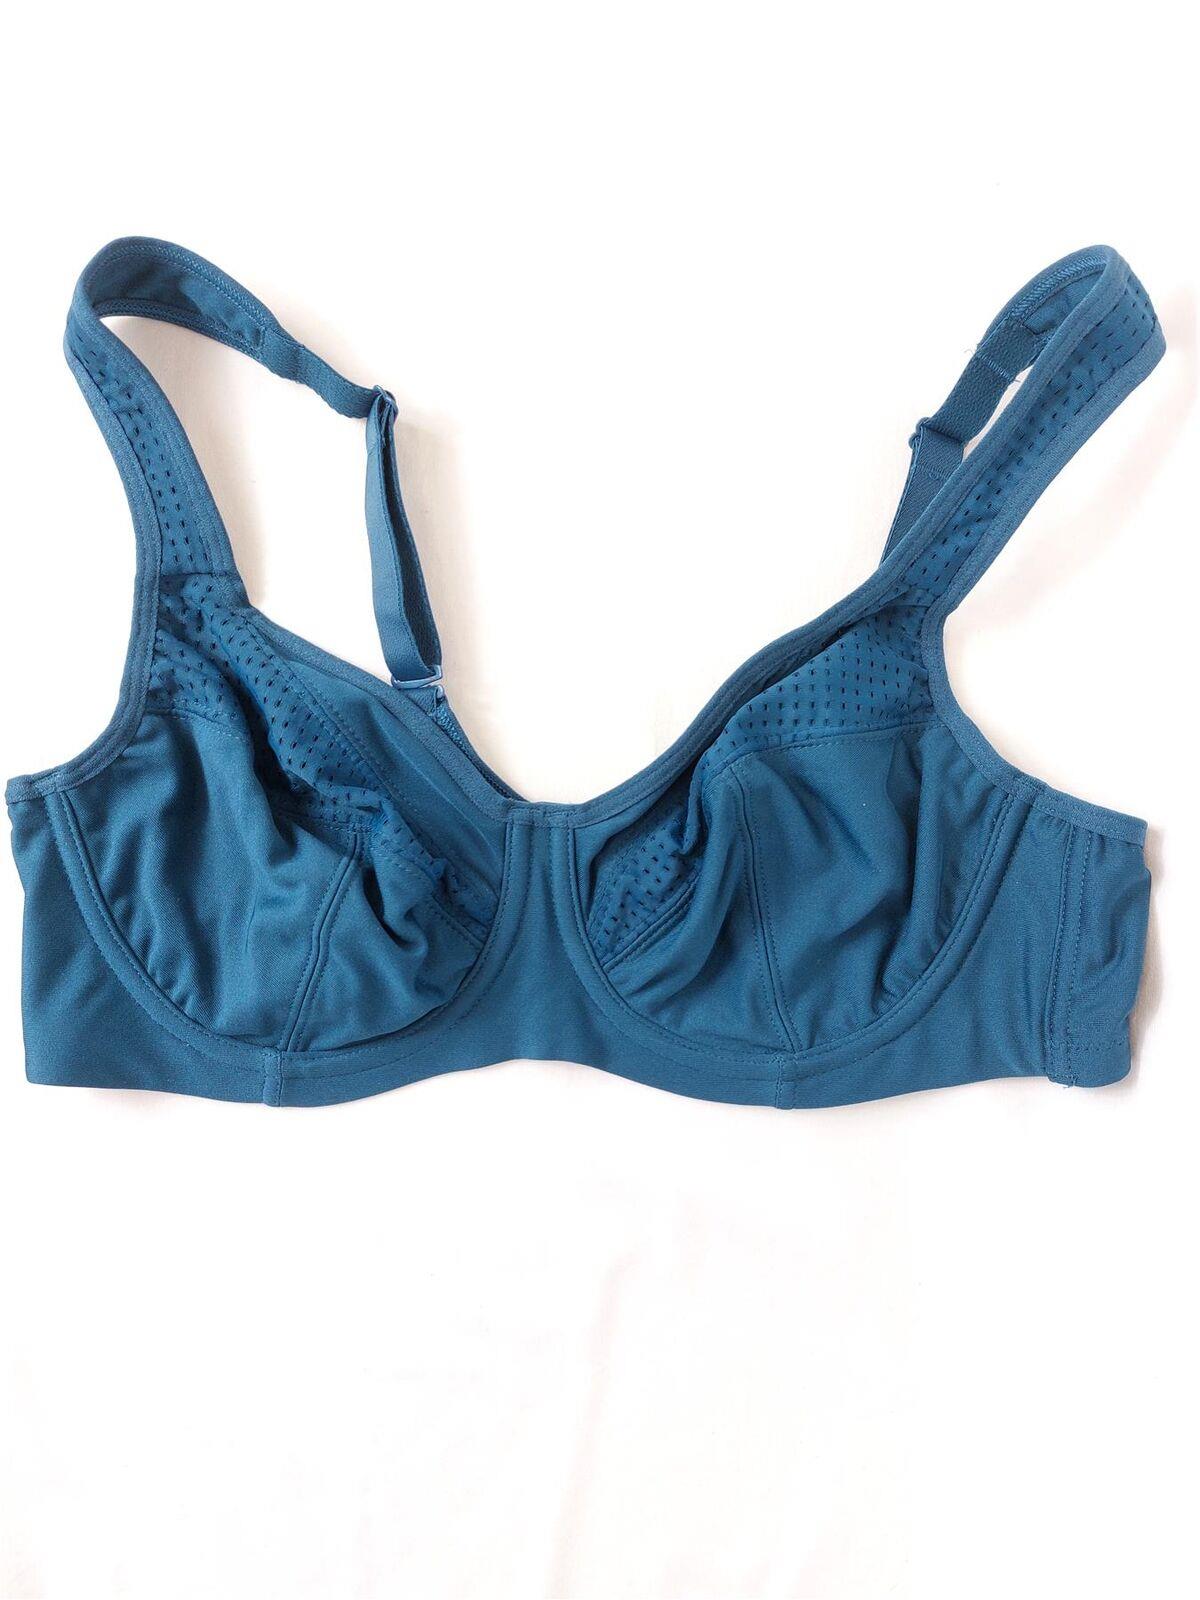 MS Sports Bra High-Impact Underwired Non-Padded Brand New High Street Store